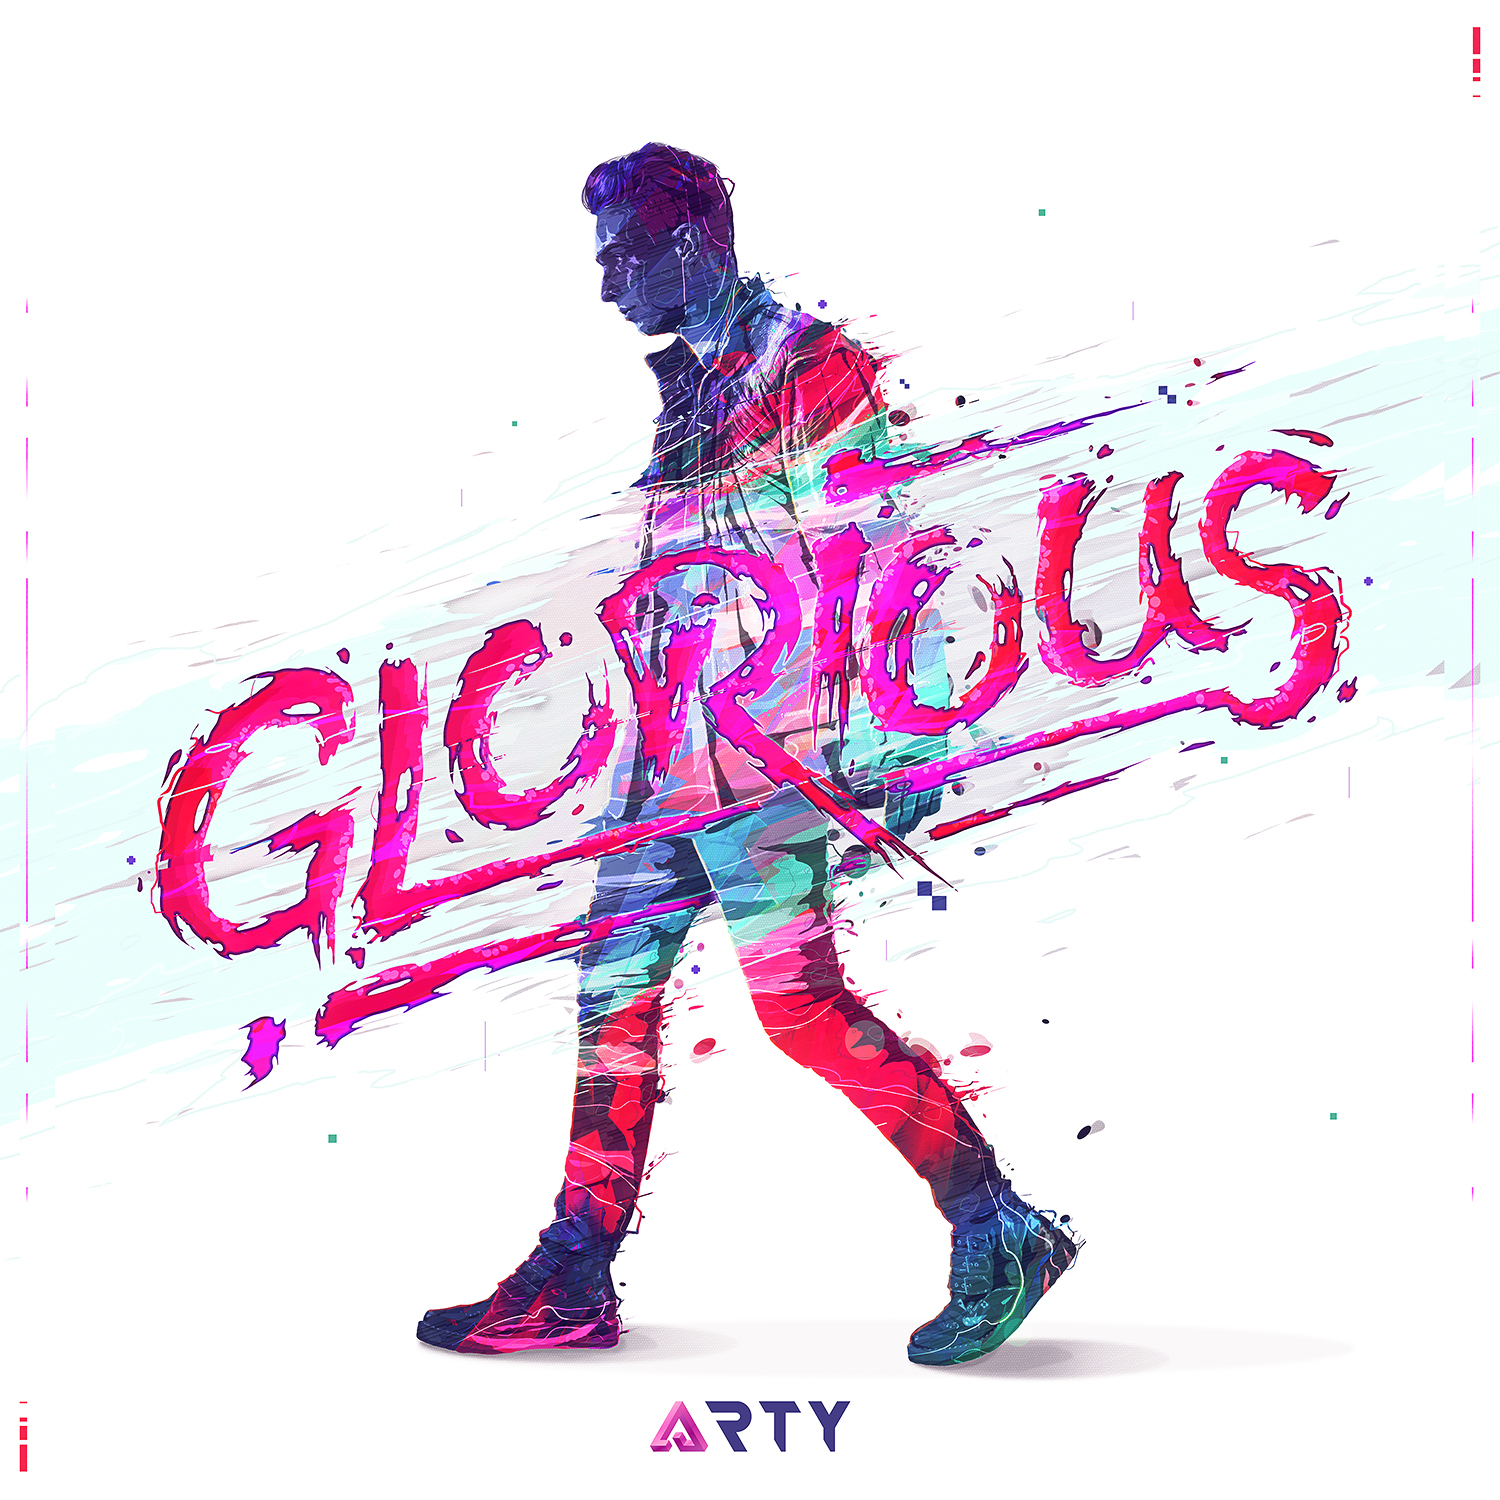 'Glorious' by Arty